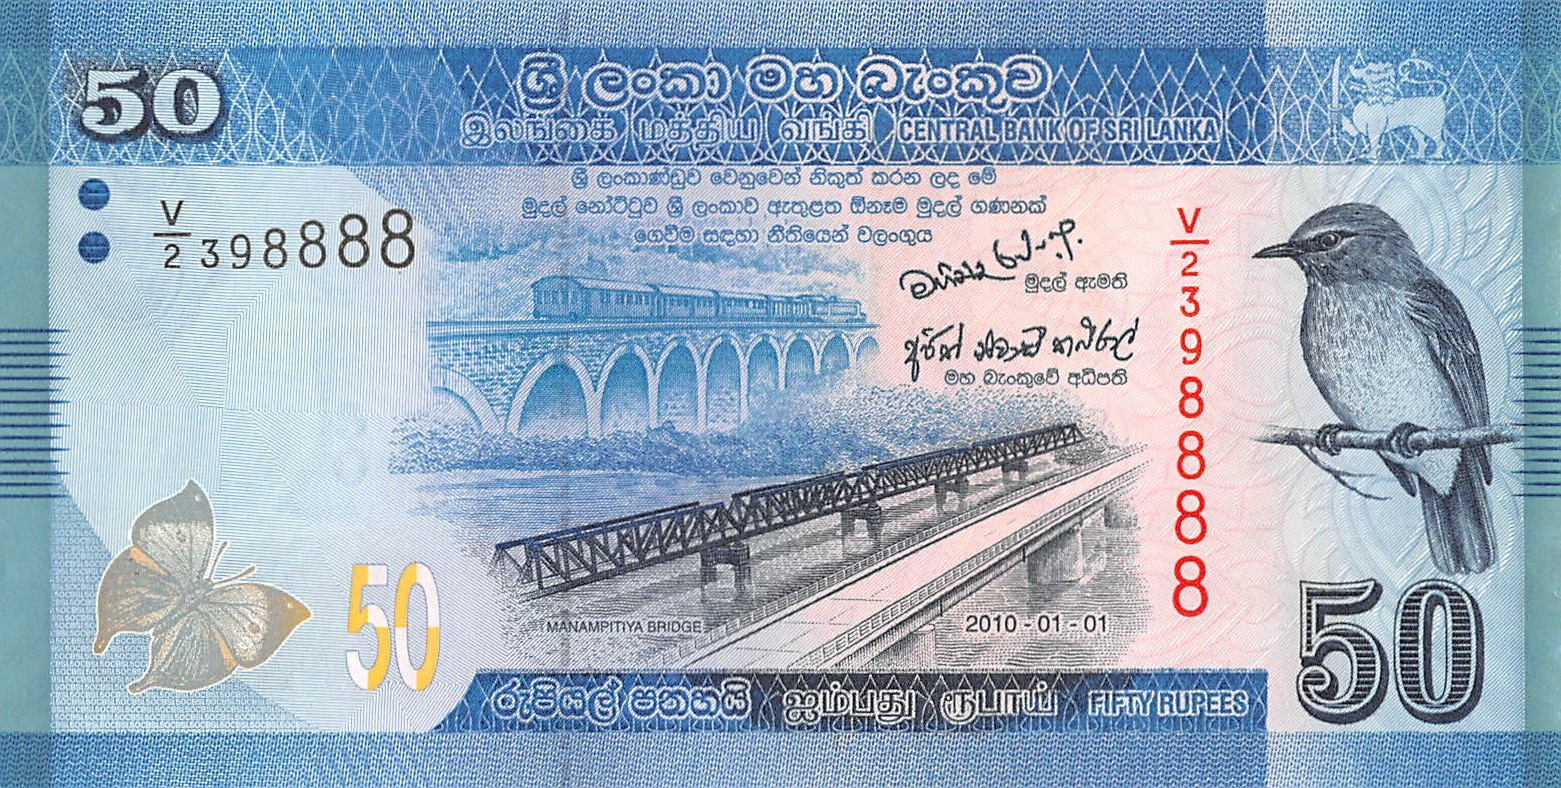 SRI LANKA 2010 50 RUPEES UNCIRCULATED BANKNOTE P-124 BUY FROM A USA SELLER !!!!! 